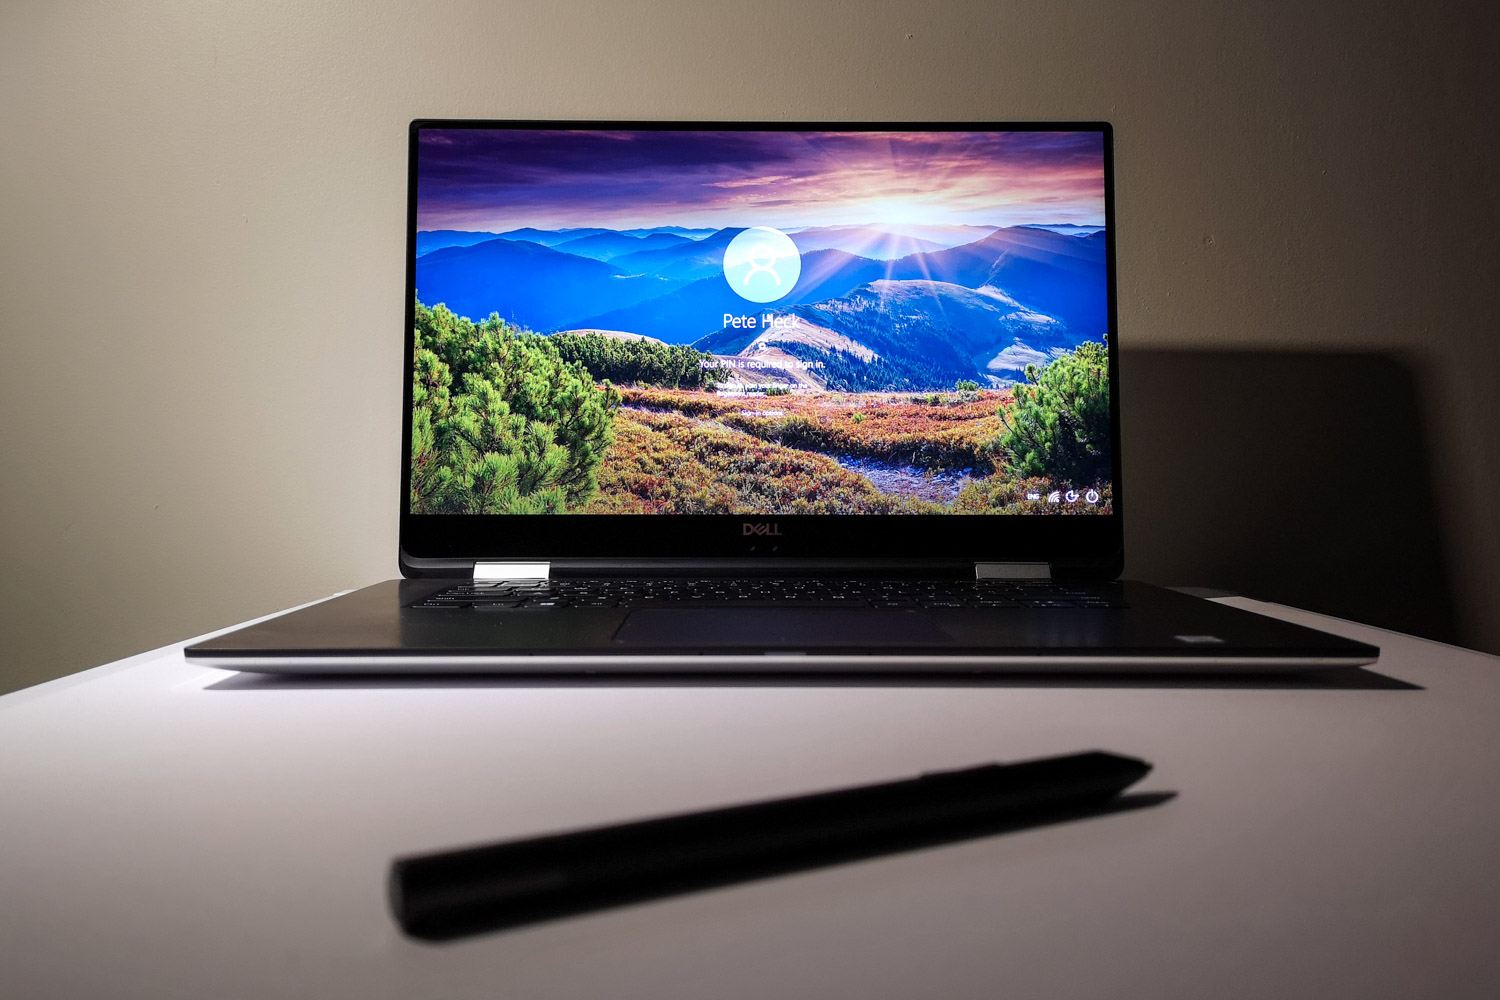 Dell XPS15 2 in 1 Laptop